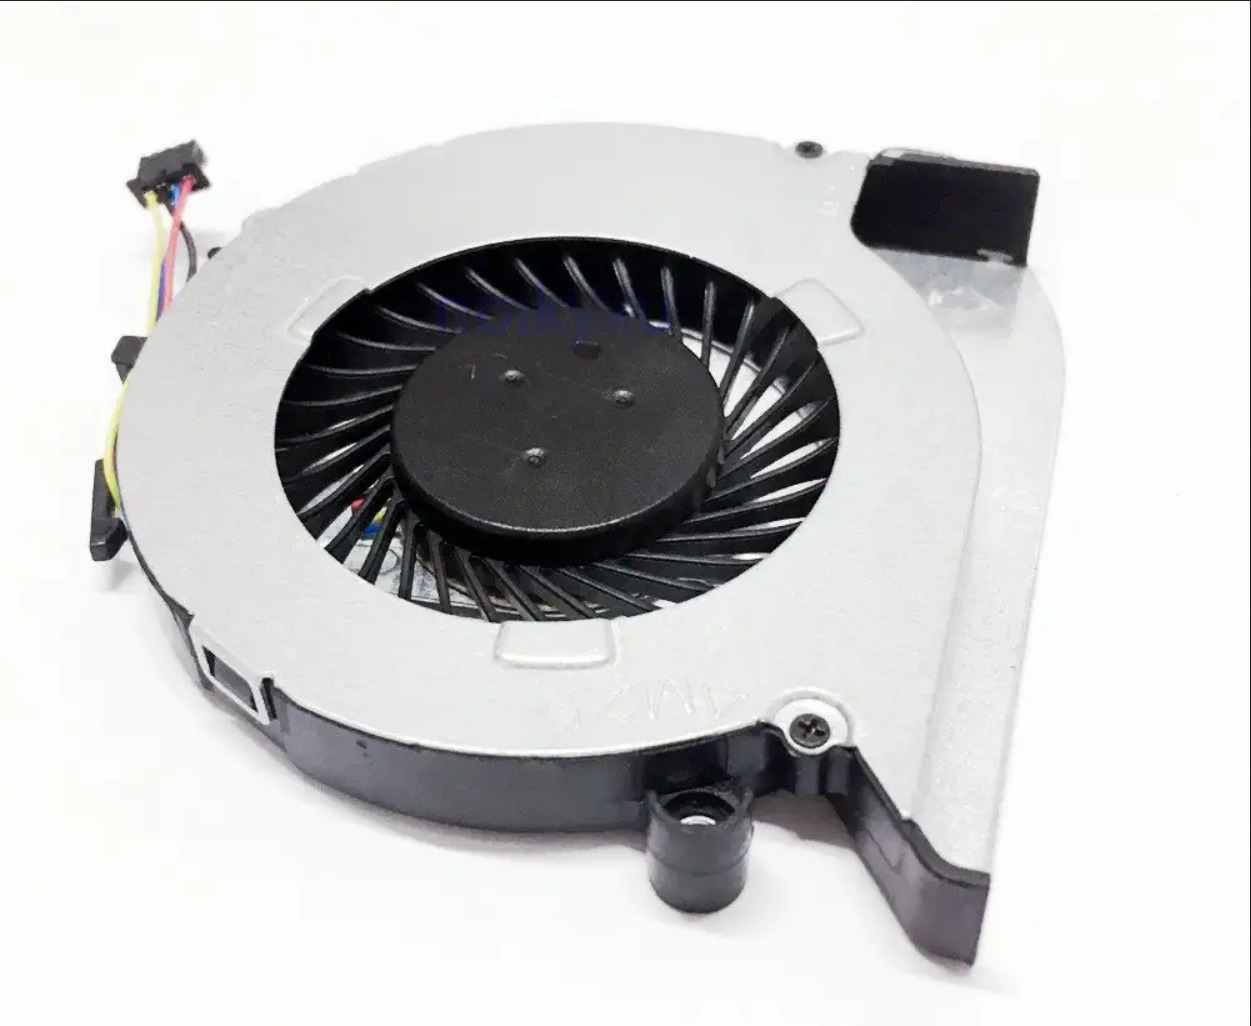 CPU Cooling Fan for HP Pavilion 17-g121wm. Available Now for 19.99